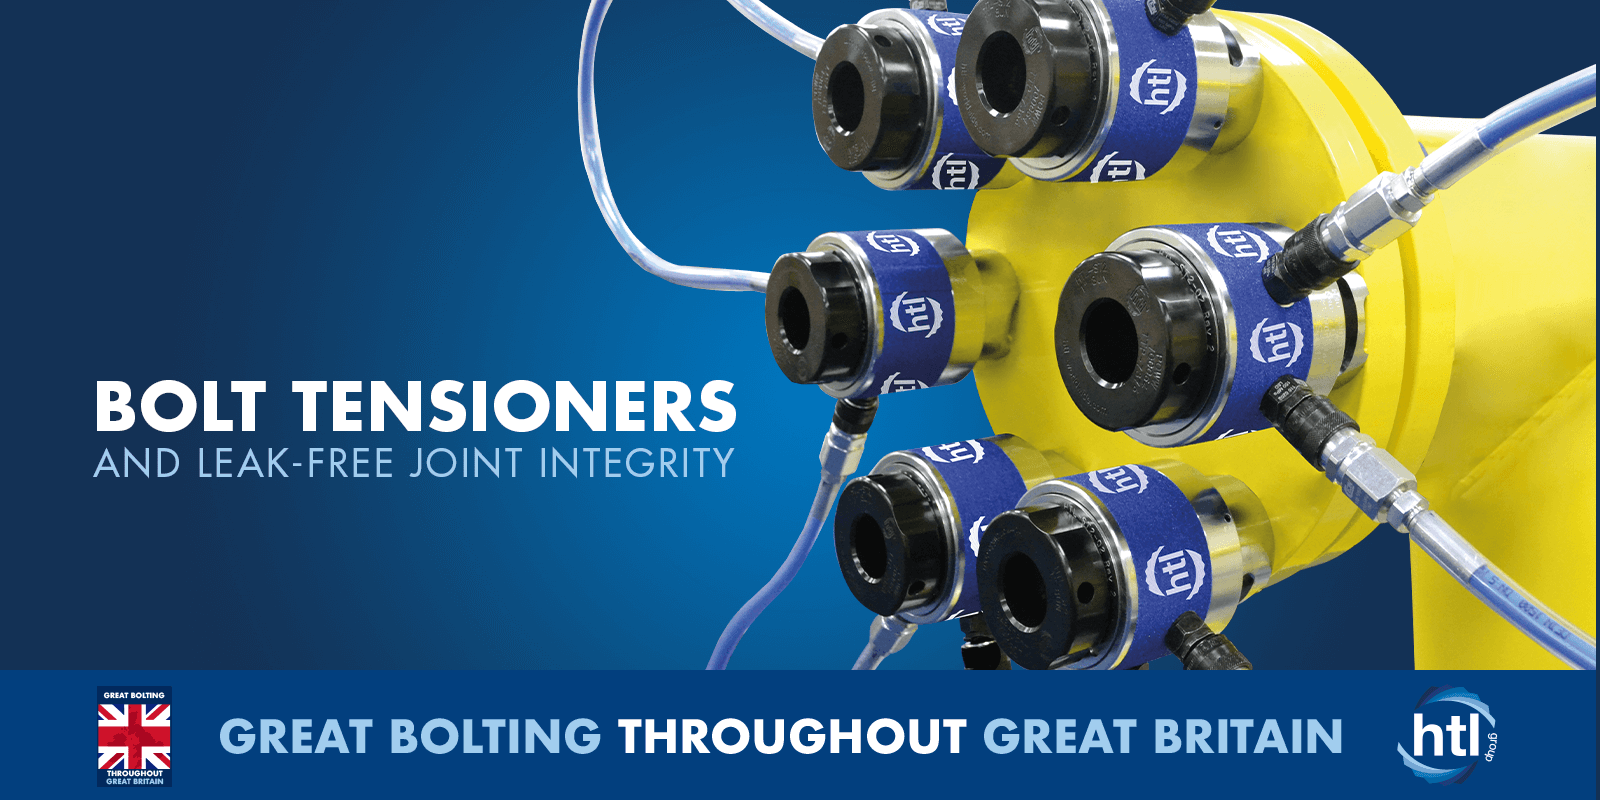 Bolt Tensioners & Leak-Free Joint Integrity